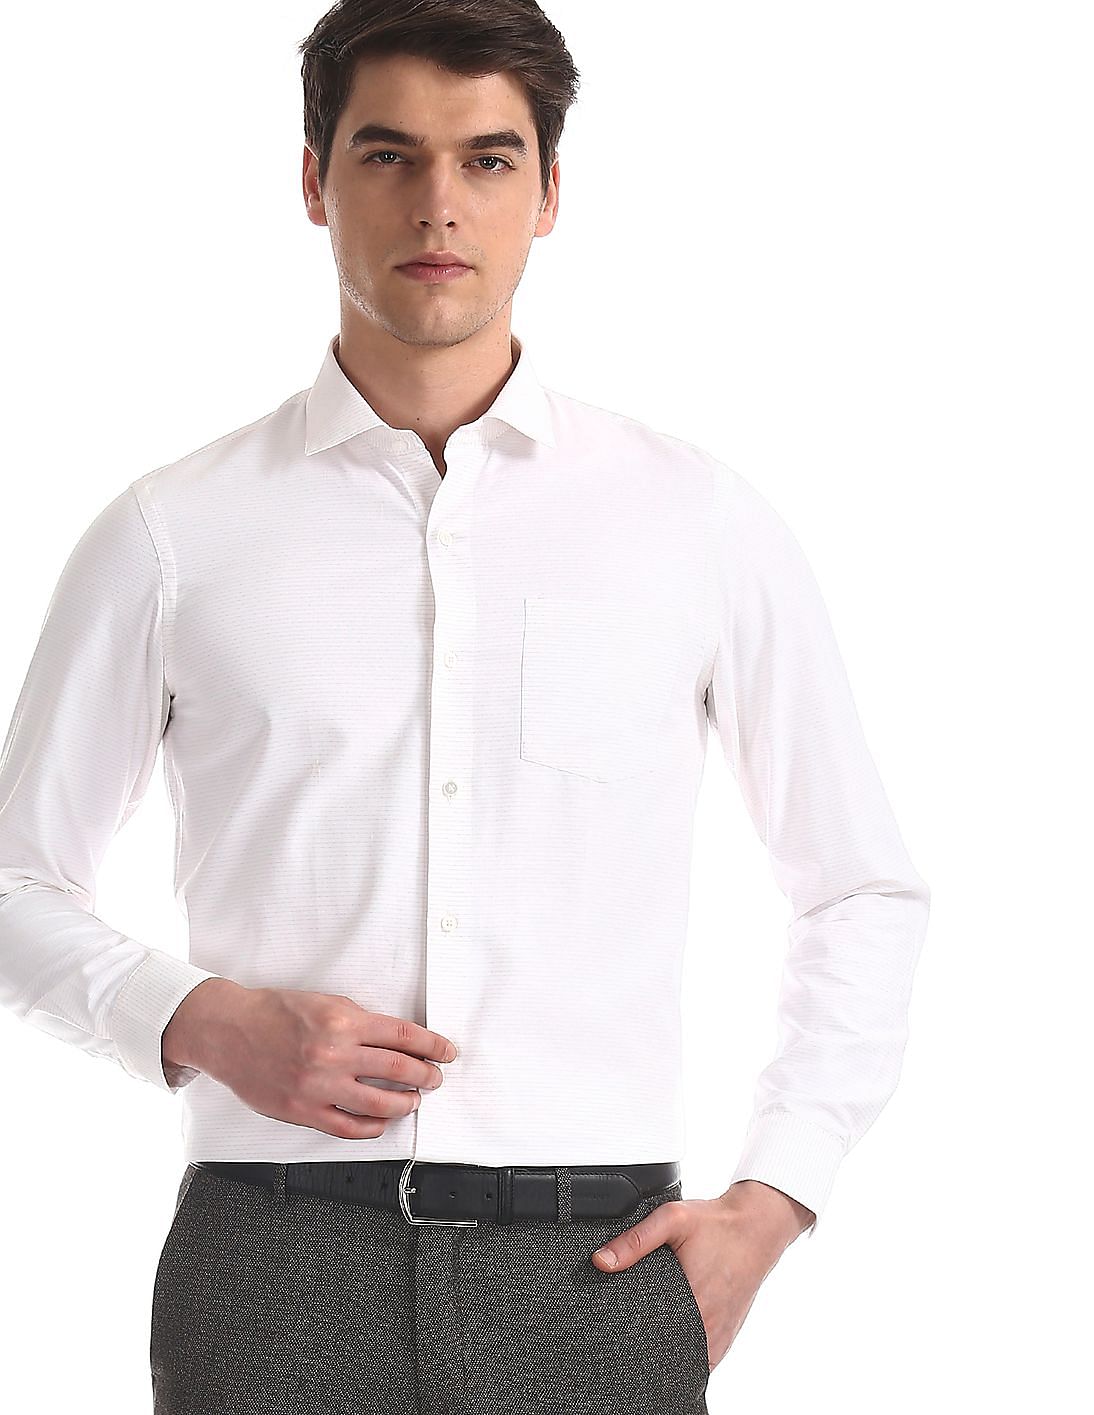 Buy Men White French Placket Striped Shirt online at NNNOW.com